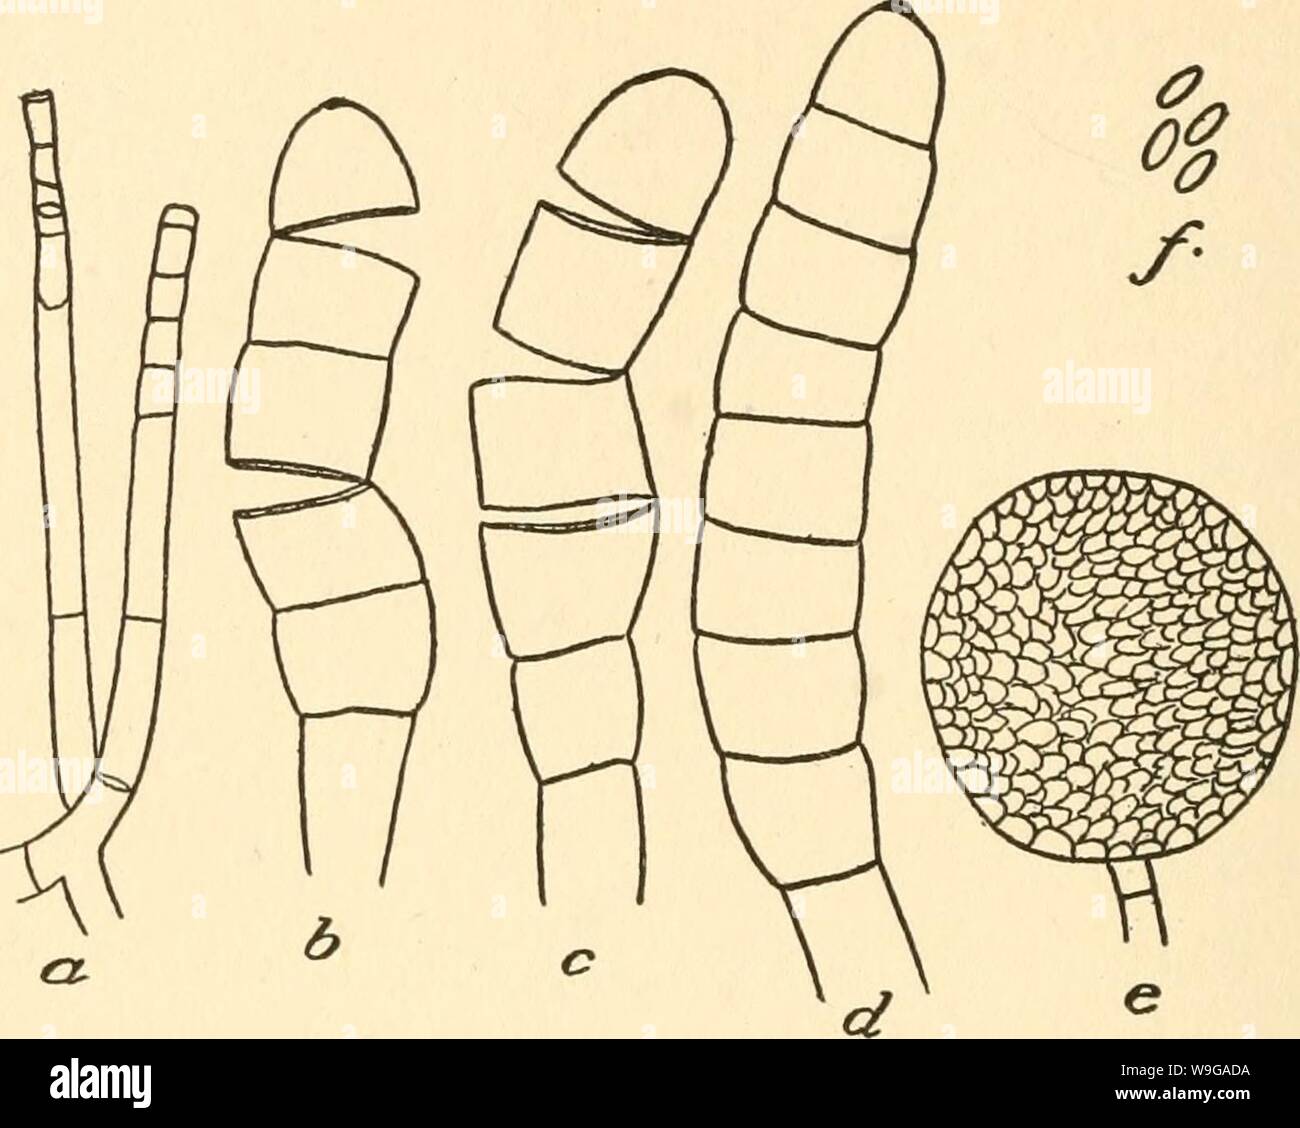 Archive image from page 161 of The culture and diseases of. The culture and diseases of the sweet pea  culturediseaseso01taub Year: 1917 ( n6 DISEASES OF THE SWEET PEA    fig. 14. a Endospores. b c Chlamydospores breaking up into individual spores, d Chlamydospores un- broken, f Ascospores. e single perithecium. with a somewhat swollen base and a long tapering cell. The endospores are formed in the apex of this terminal cell and are pushed out of the ruptured end by the growth of the unfragmented protoplasm of the base. They are hyaline, thin walled, and oblong to linear in shape. The chlam- Stock Photo